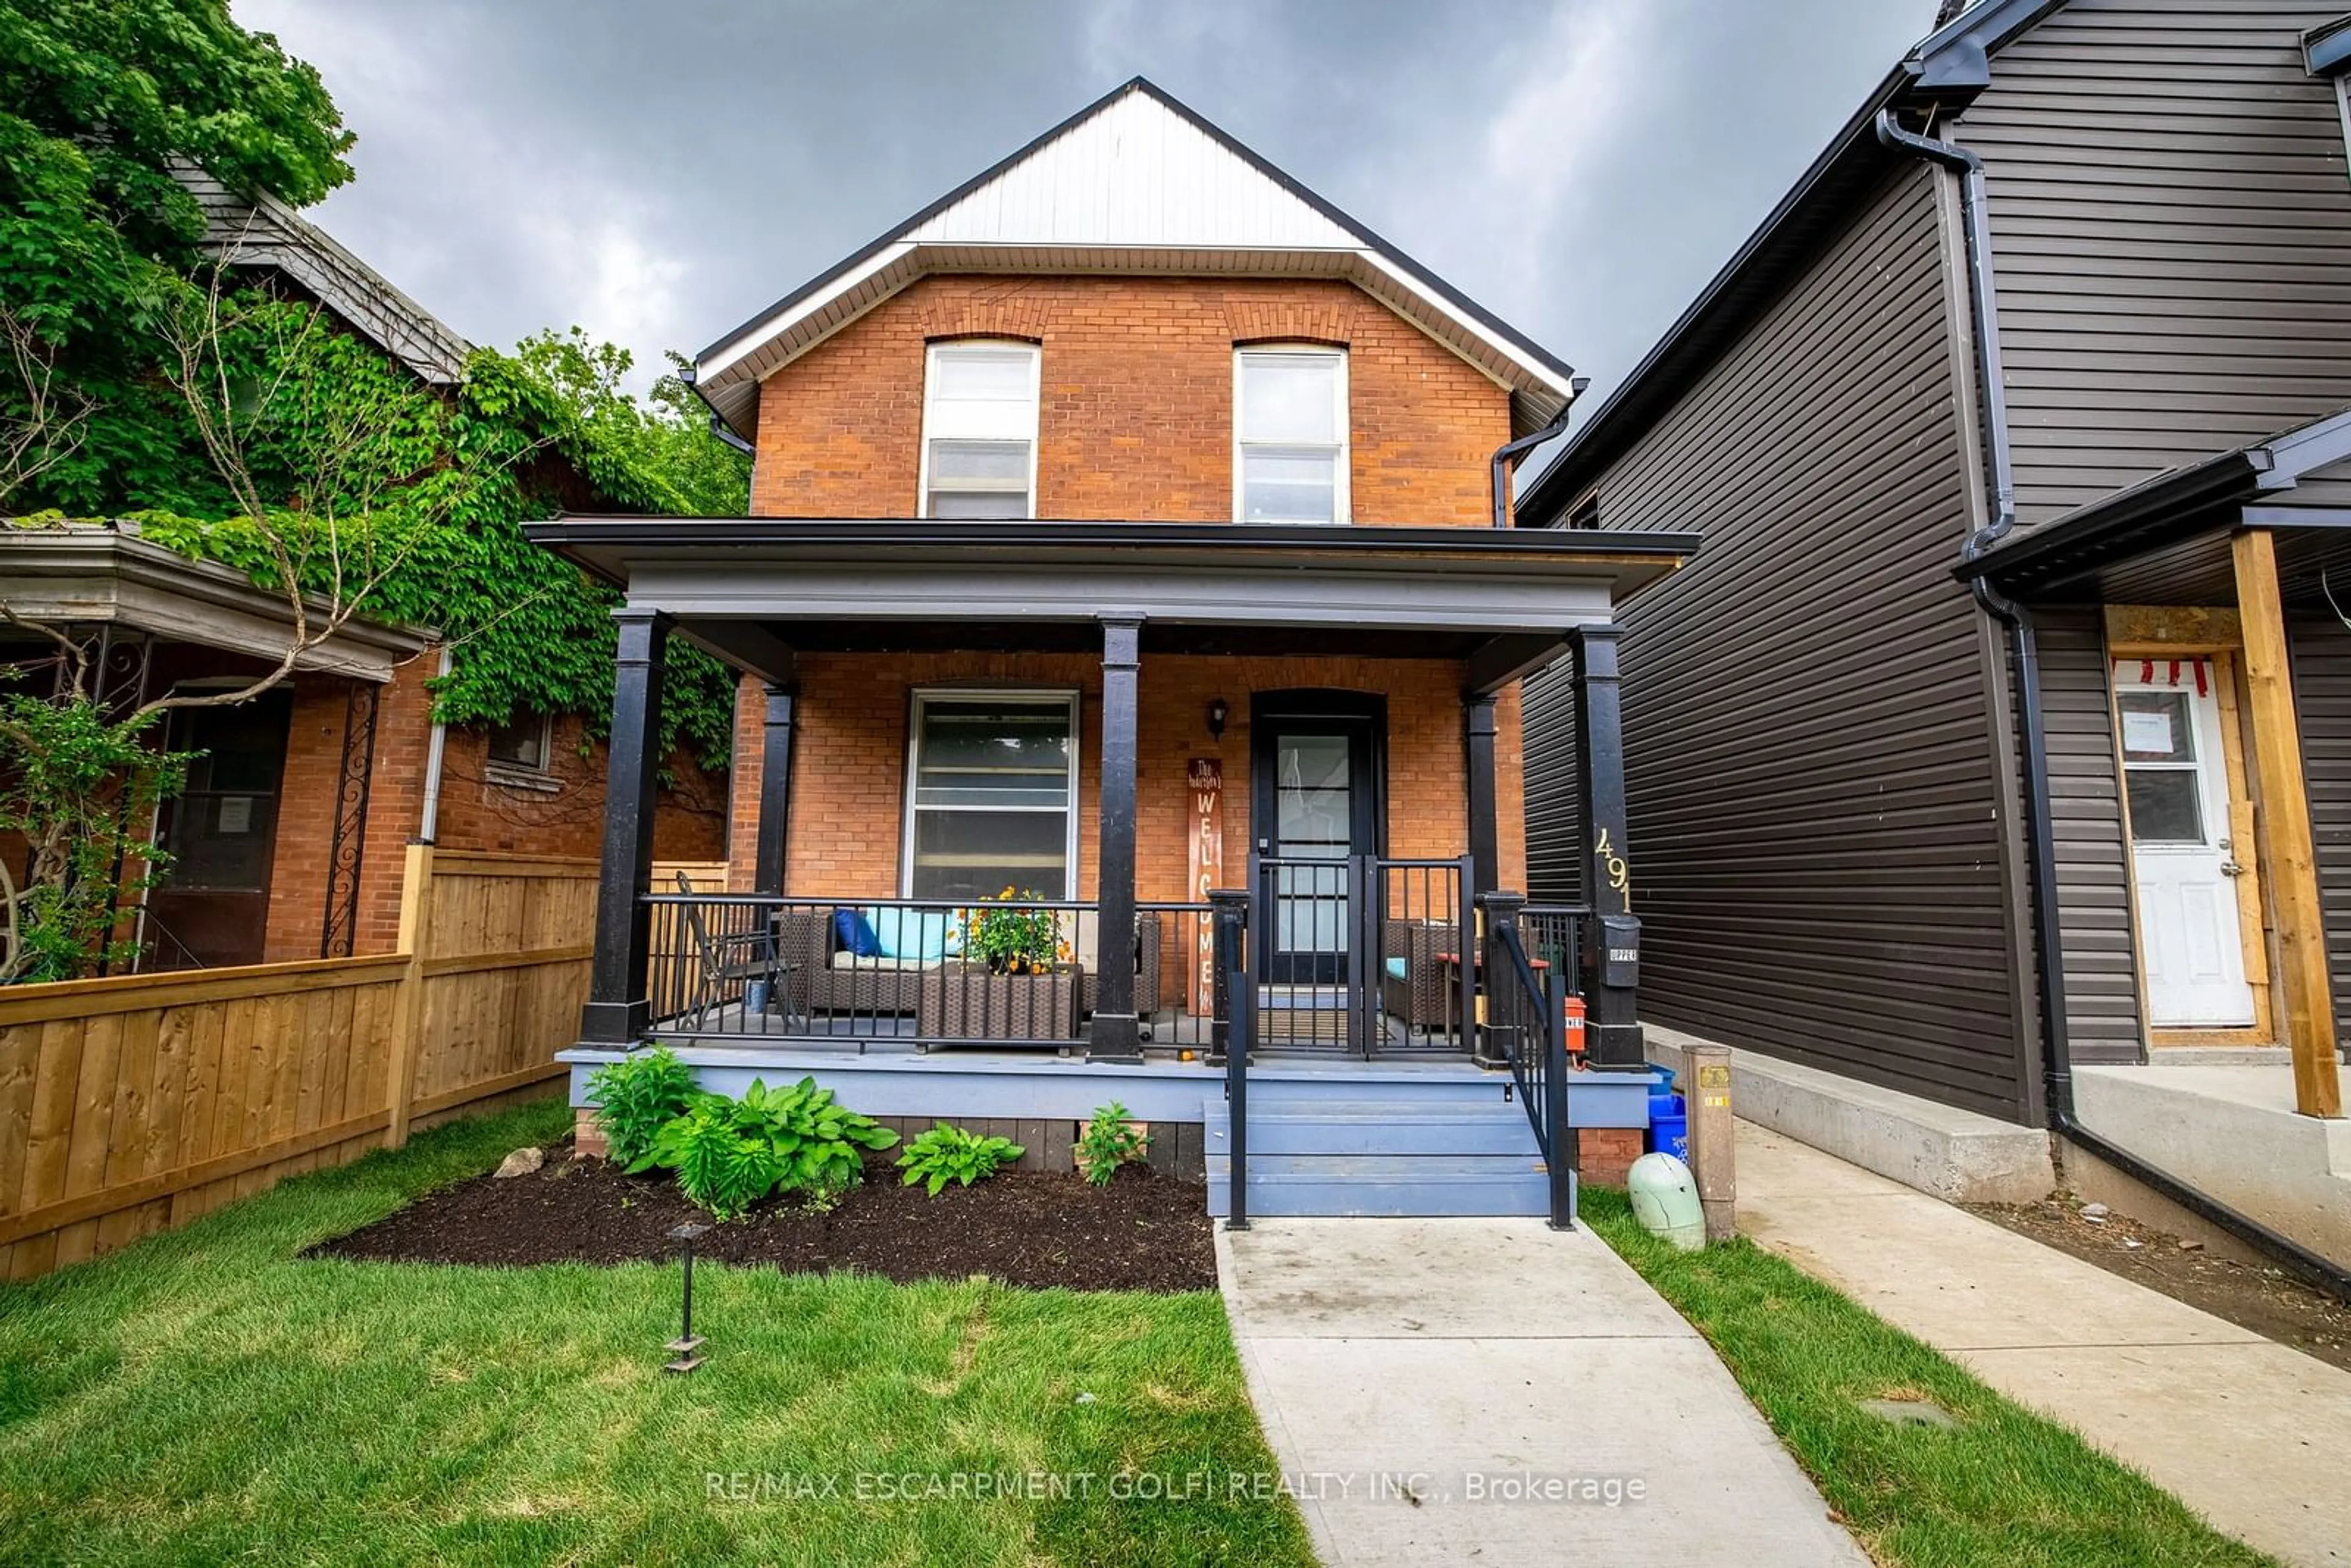 Home with brick exterior material for 491 Colborne St, Brantford Ontario N3S 3N9